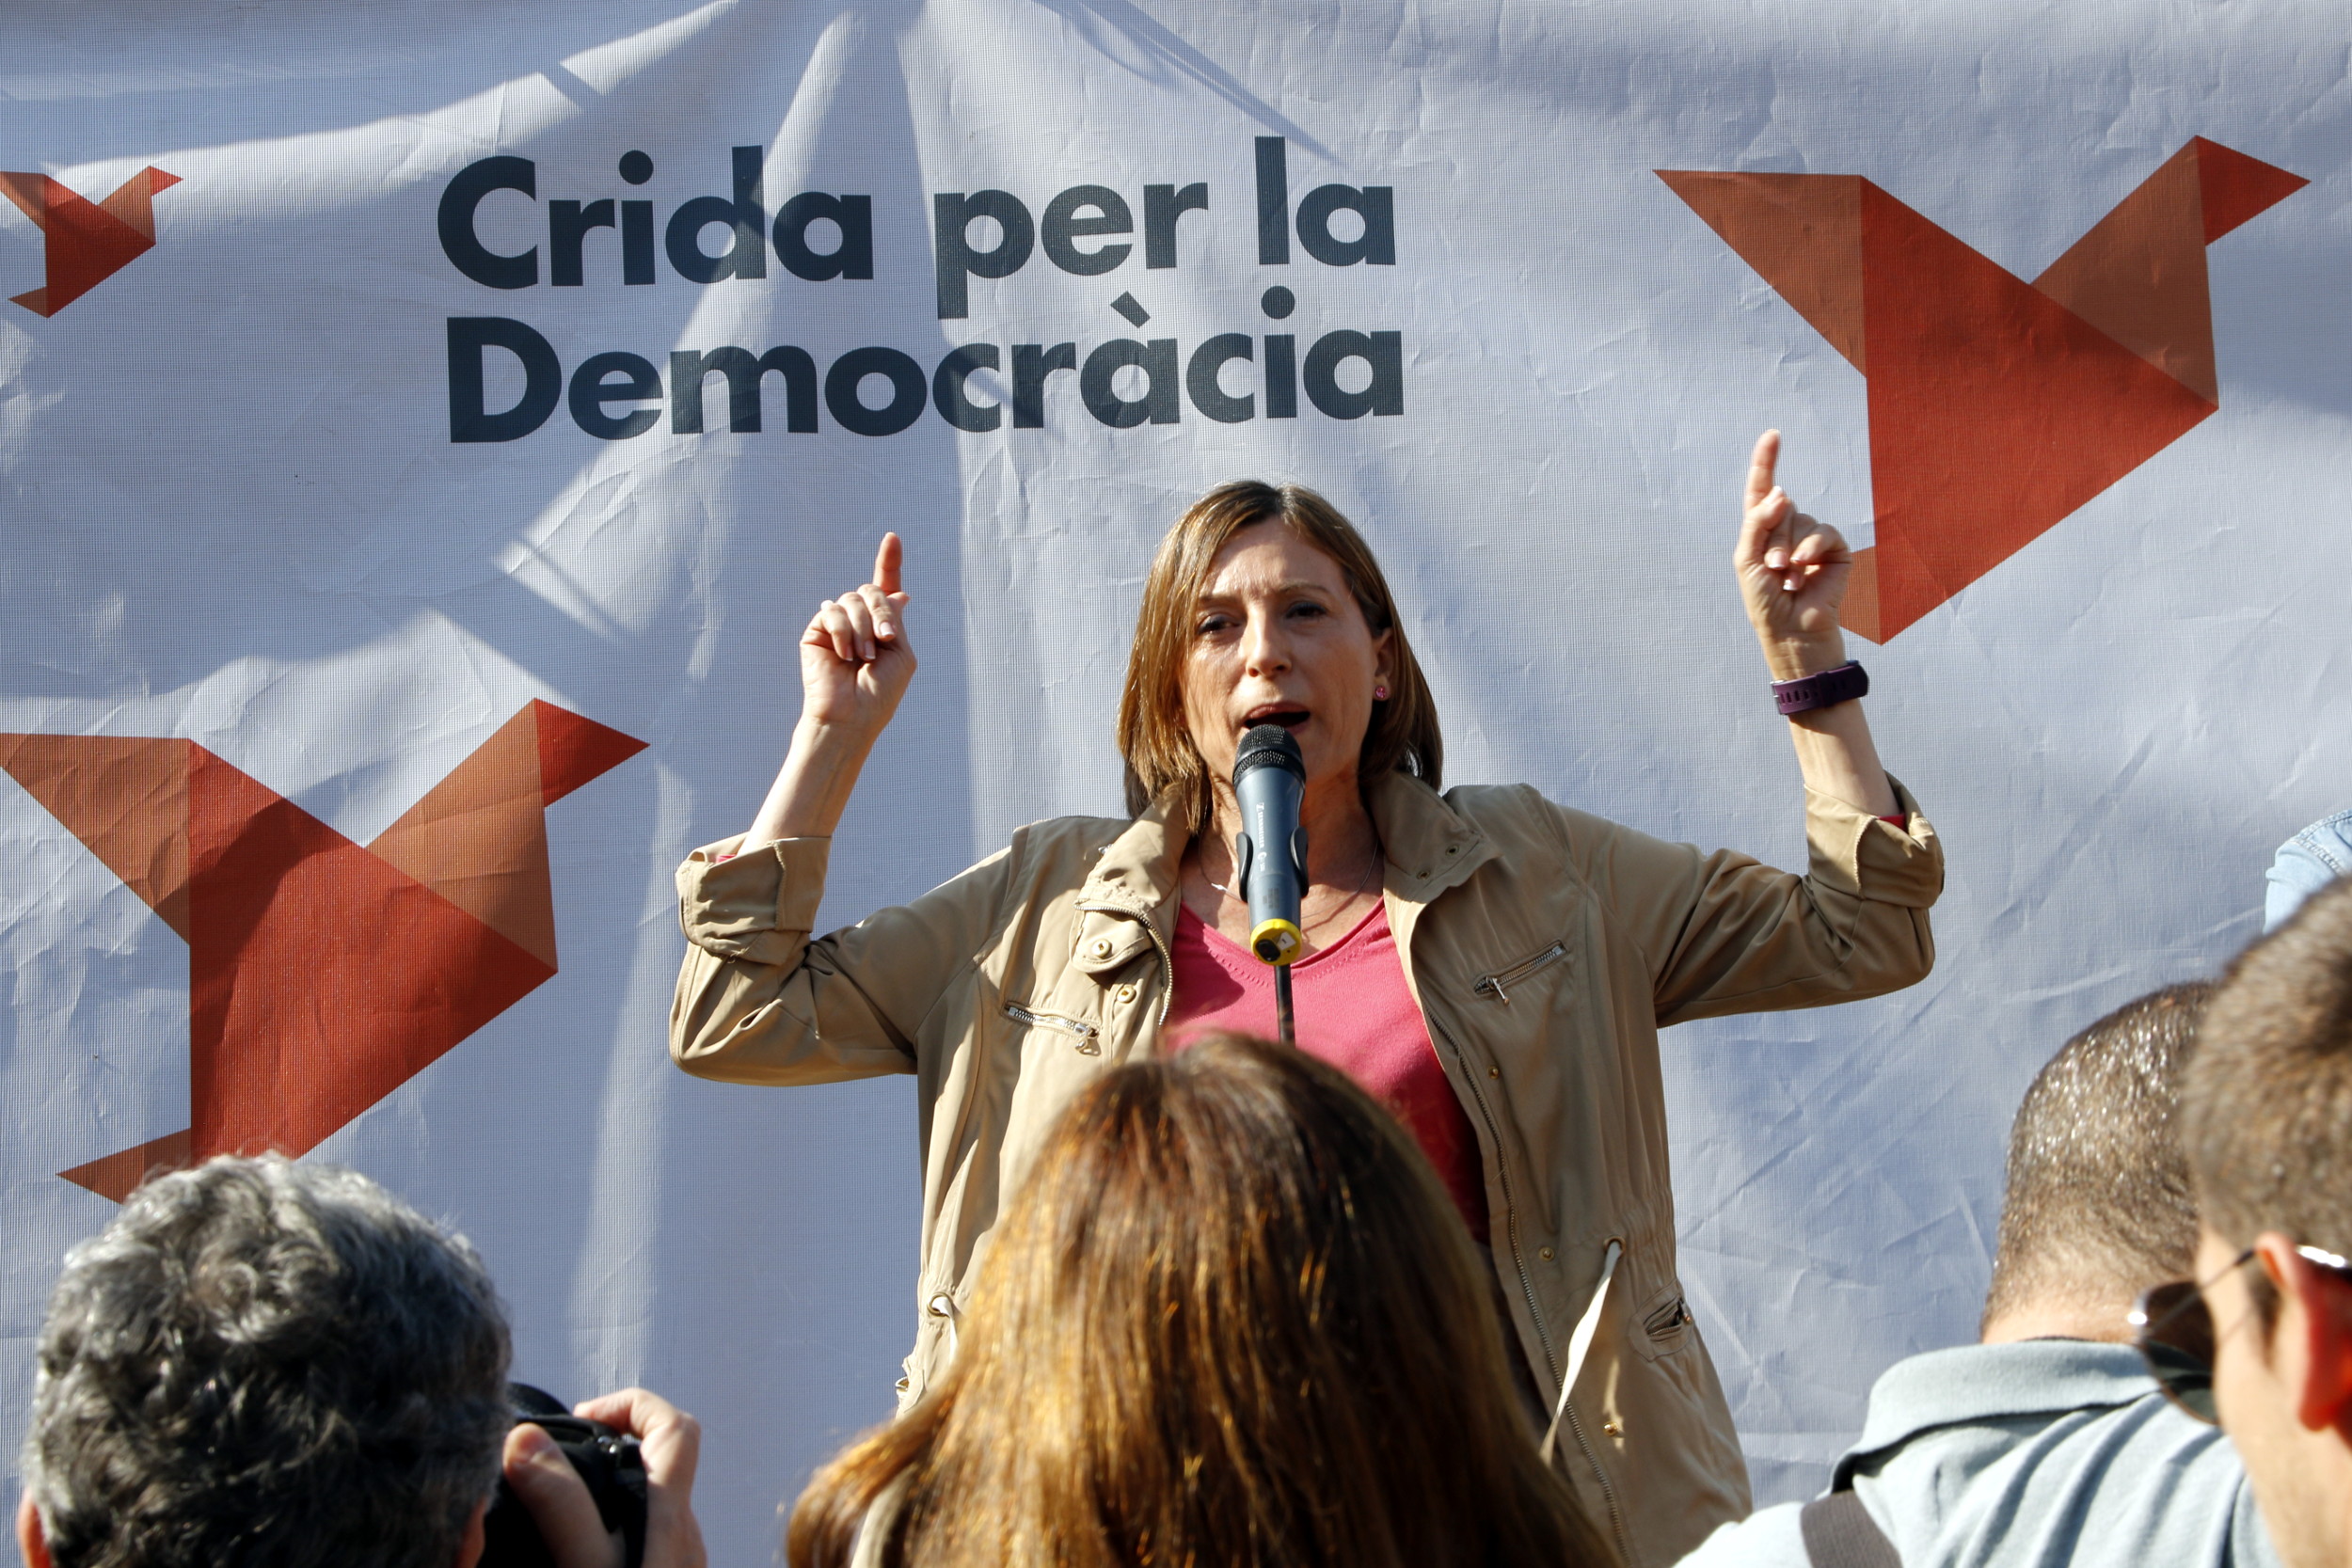 The Catalan Parliament president, Carme Forcadell, during her speech